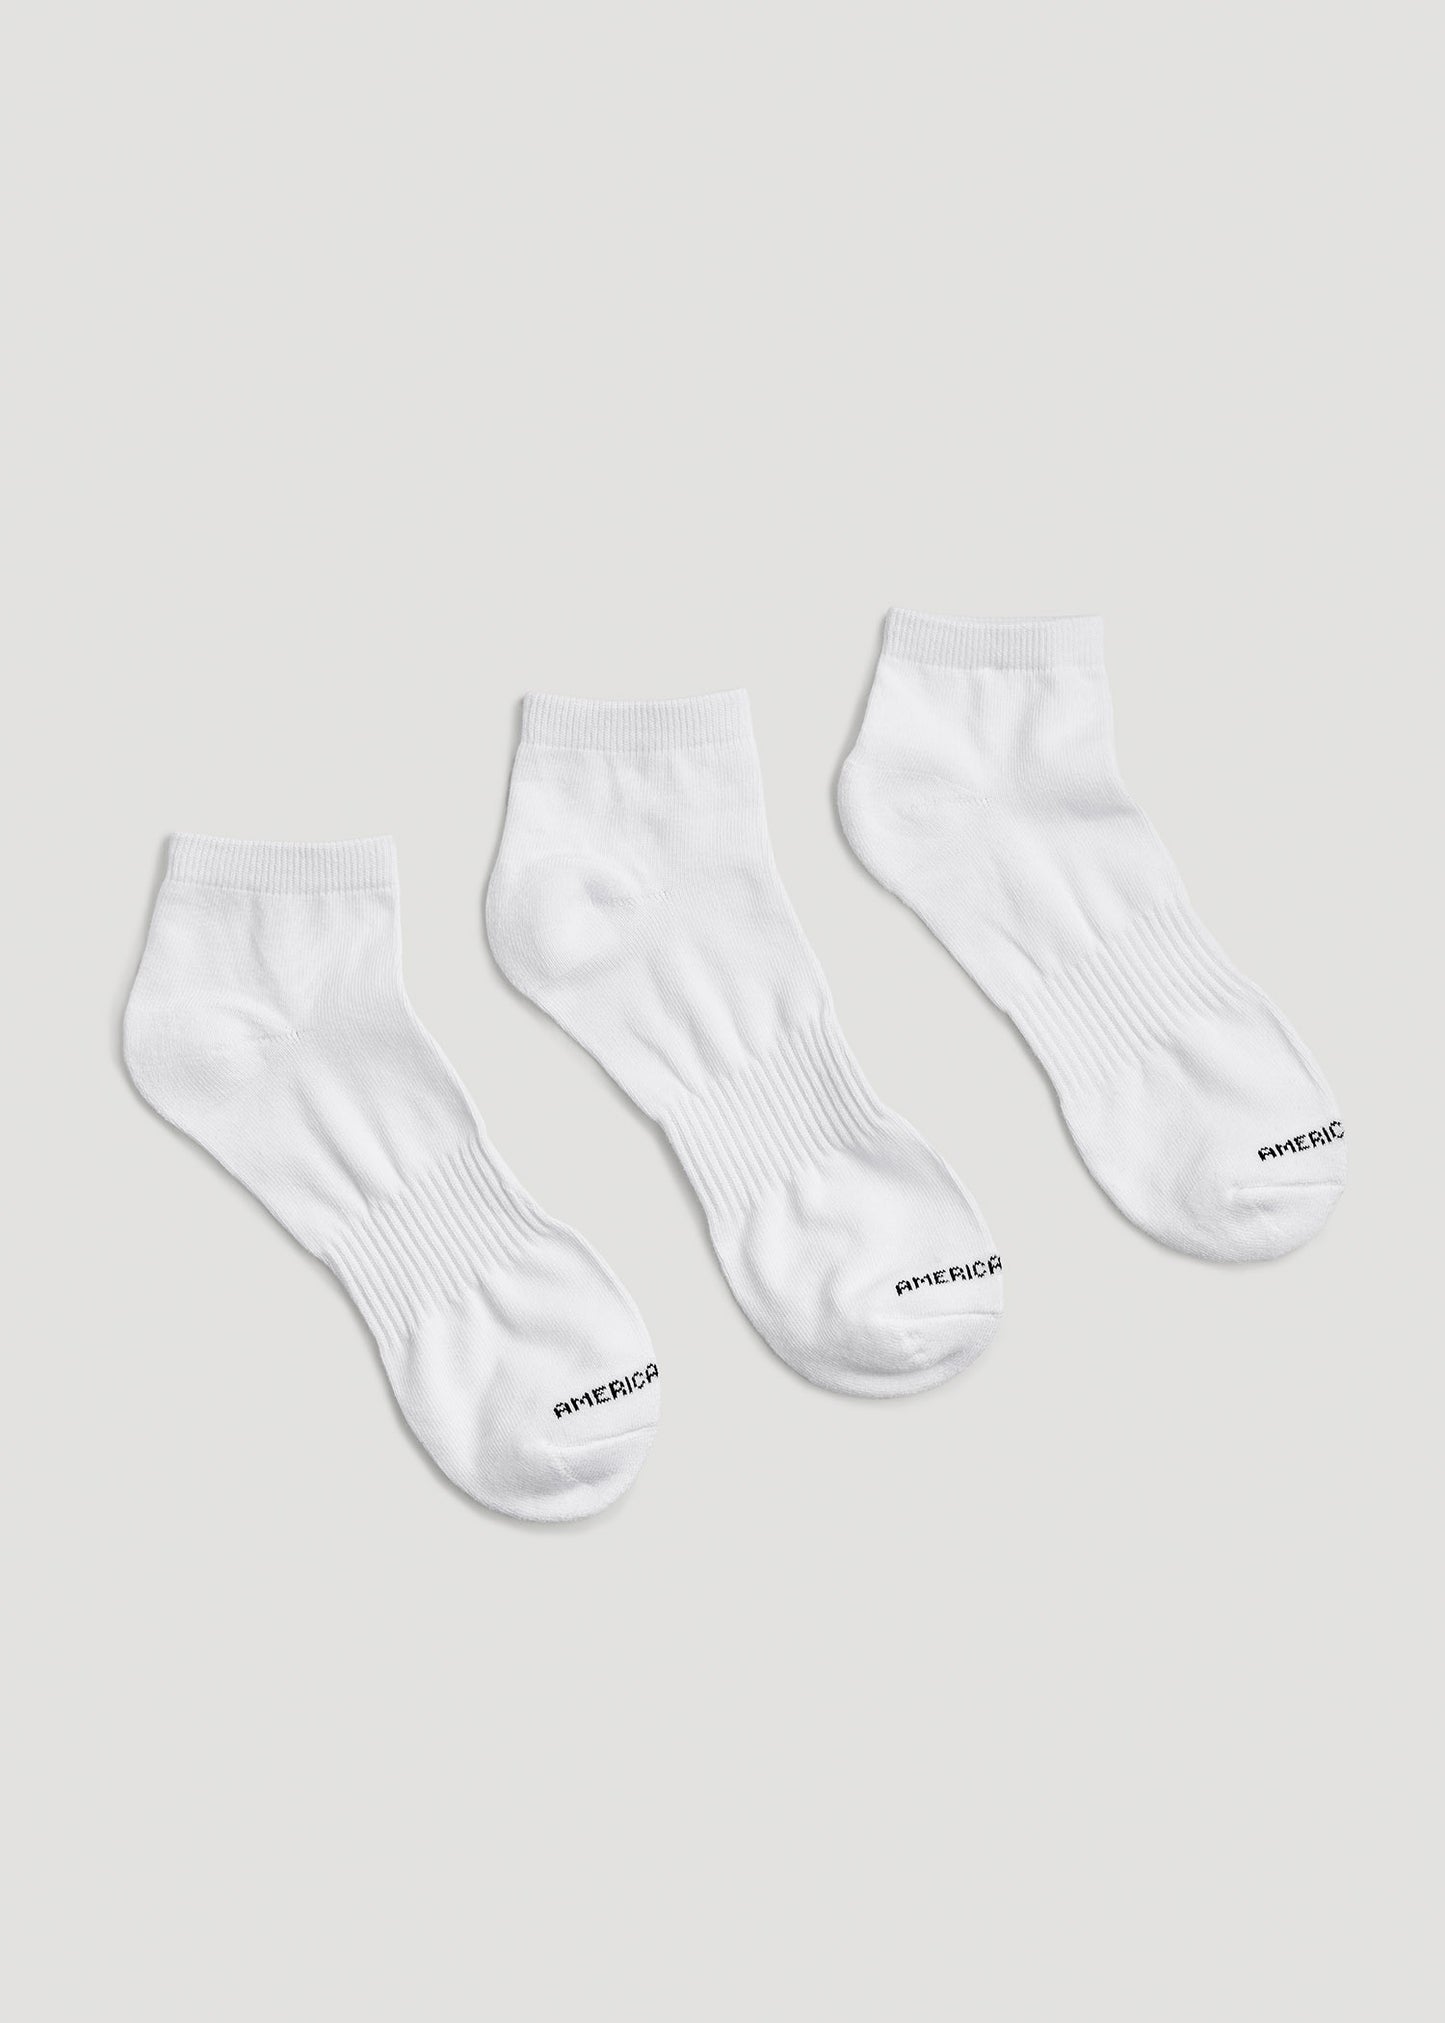    American-Tall-Mens-Athletic-Low-Ankle-Socks-X-Large-Size-14-17-White-3-Pack-Detail2